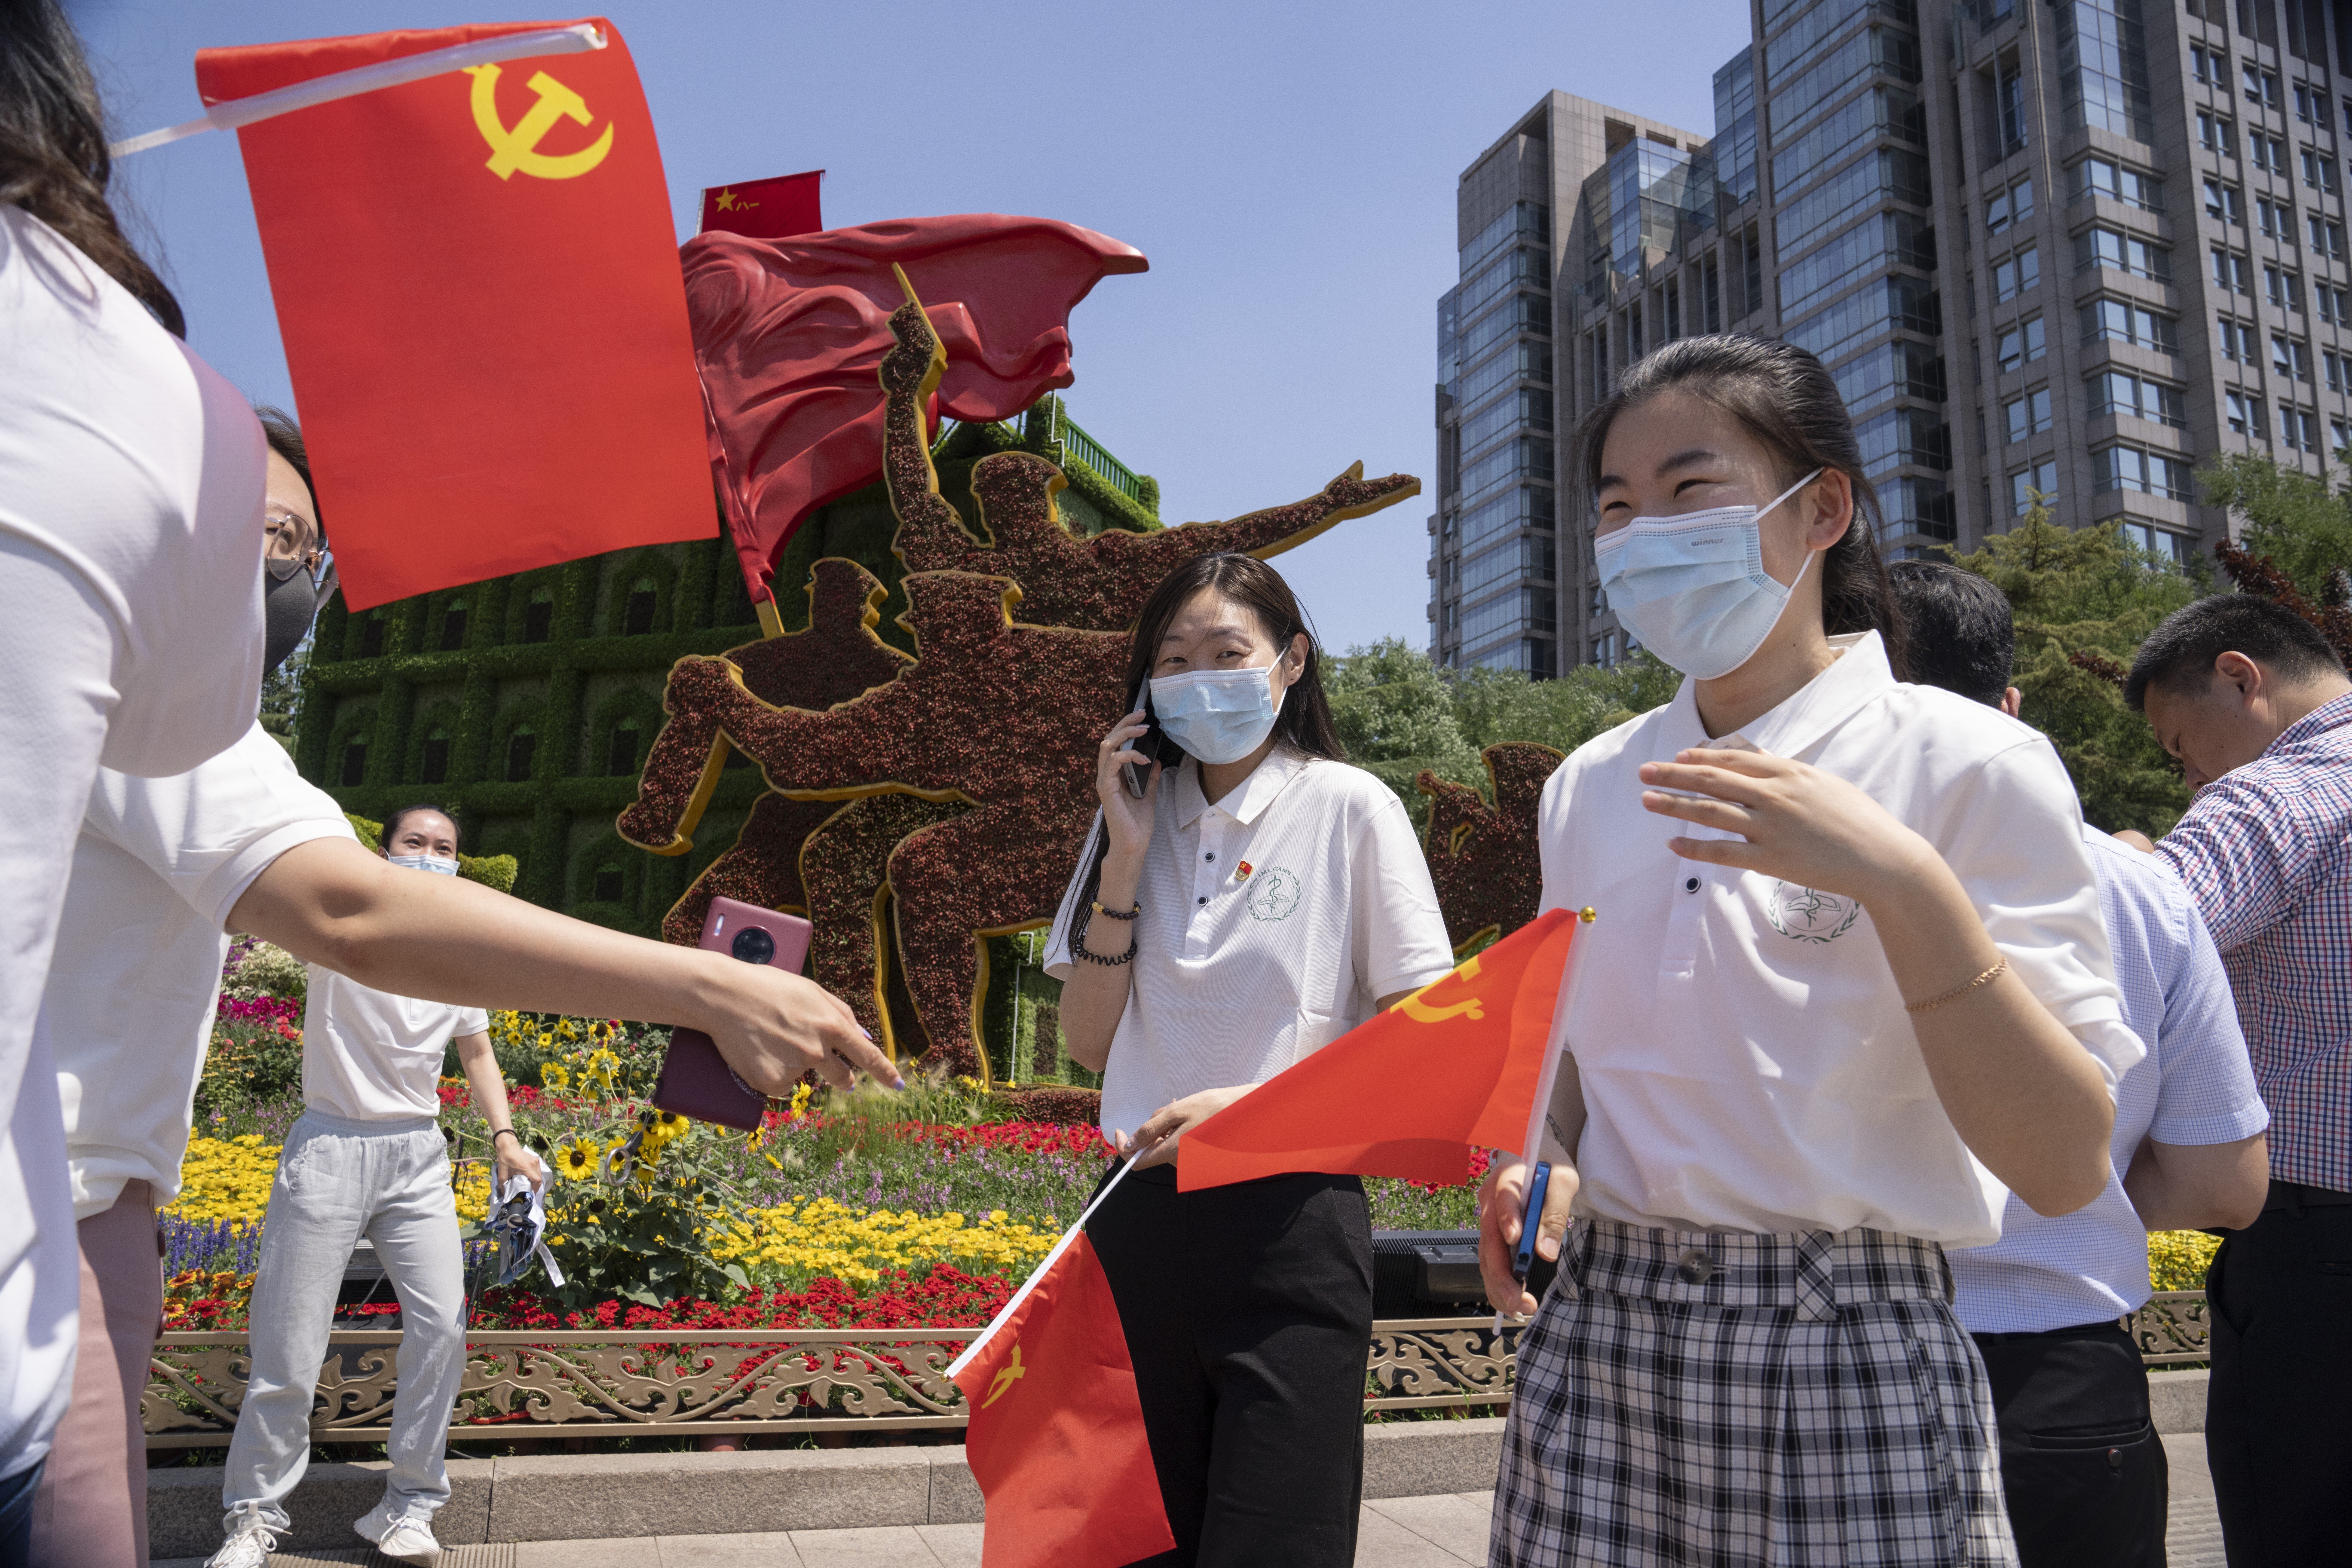 Communist Party members hold party flags in front of a floral decoration for the upcoming 100th anniversary of the founding of China's ruling Communist Party in Beijing. Photo: AP Photo